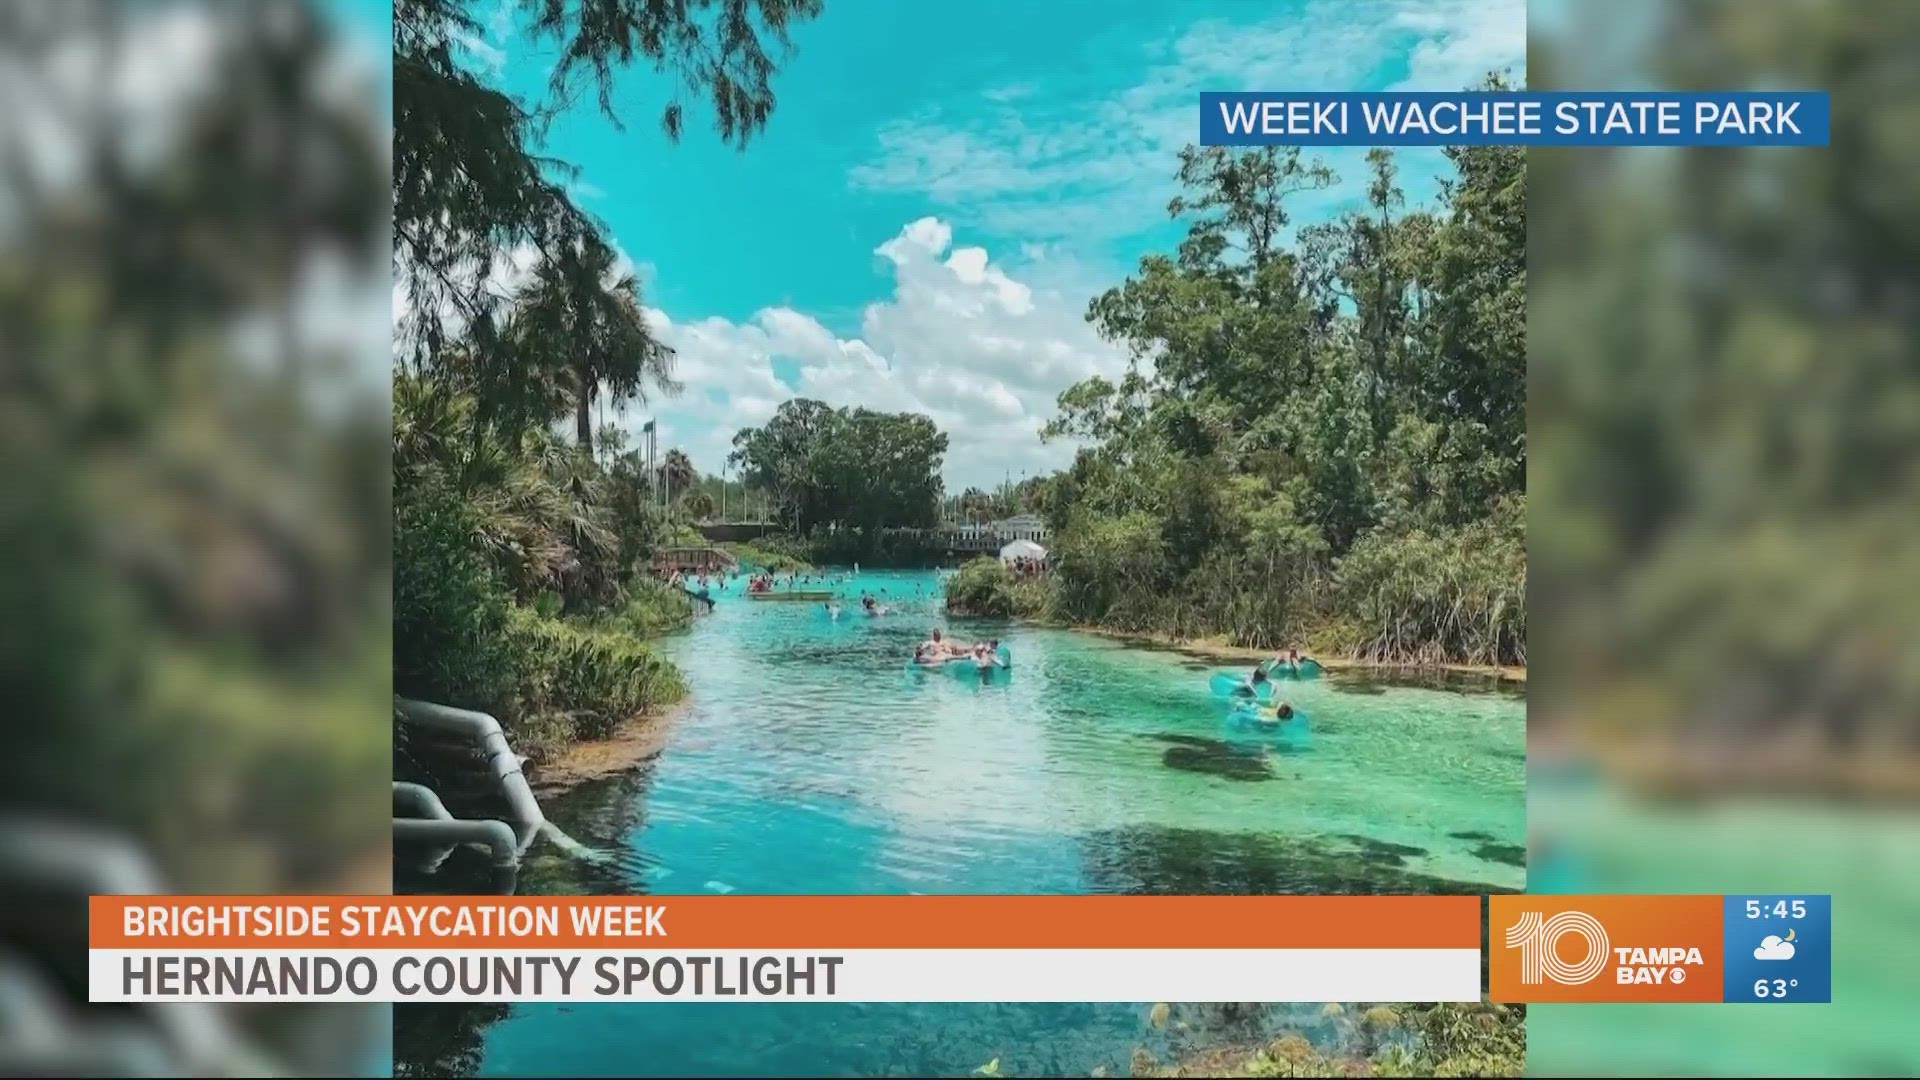 In addition to the famous mermaid experiences, Hernando County has a state park where you can swim, kayak and paddleboard.